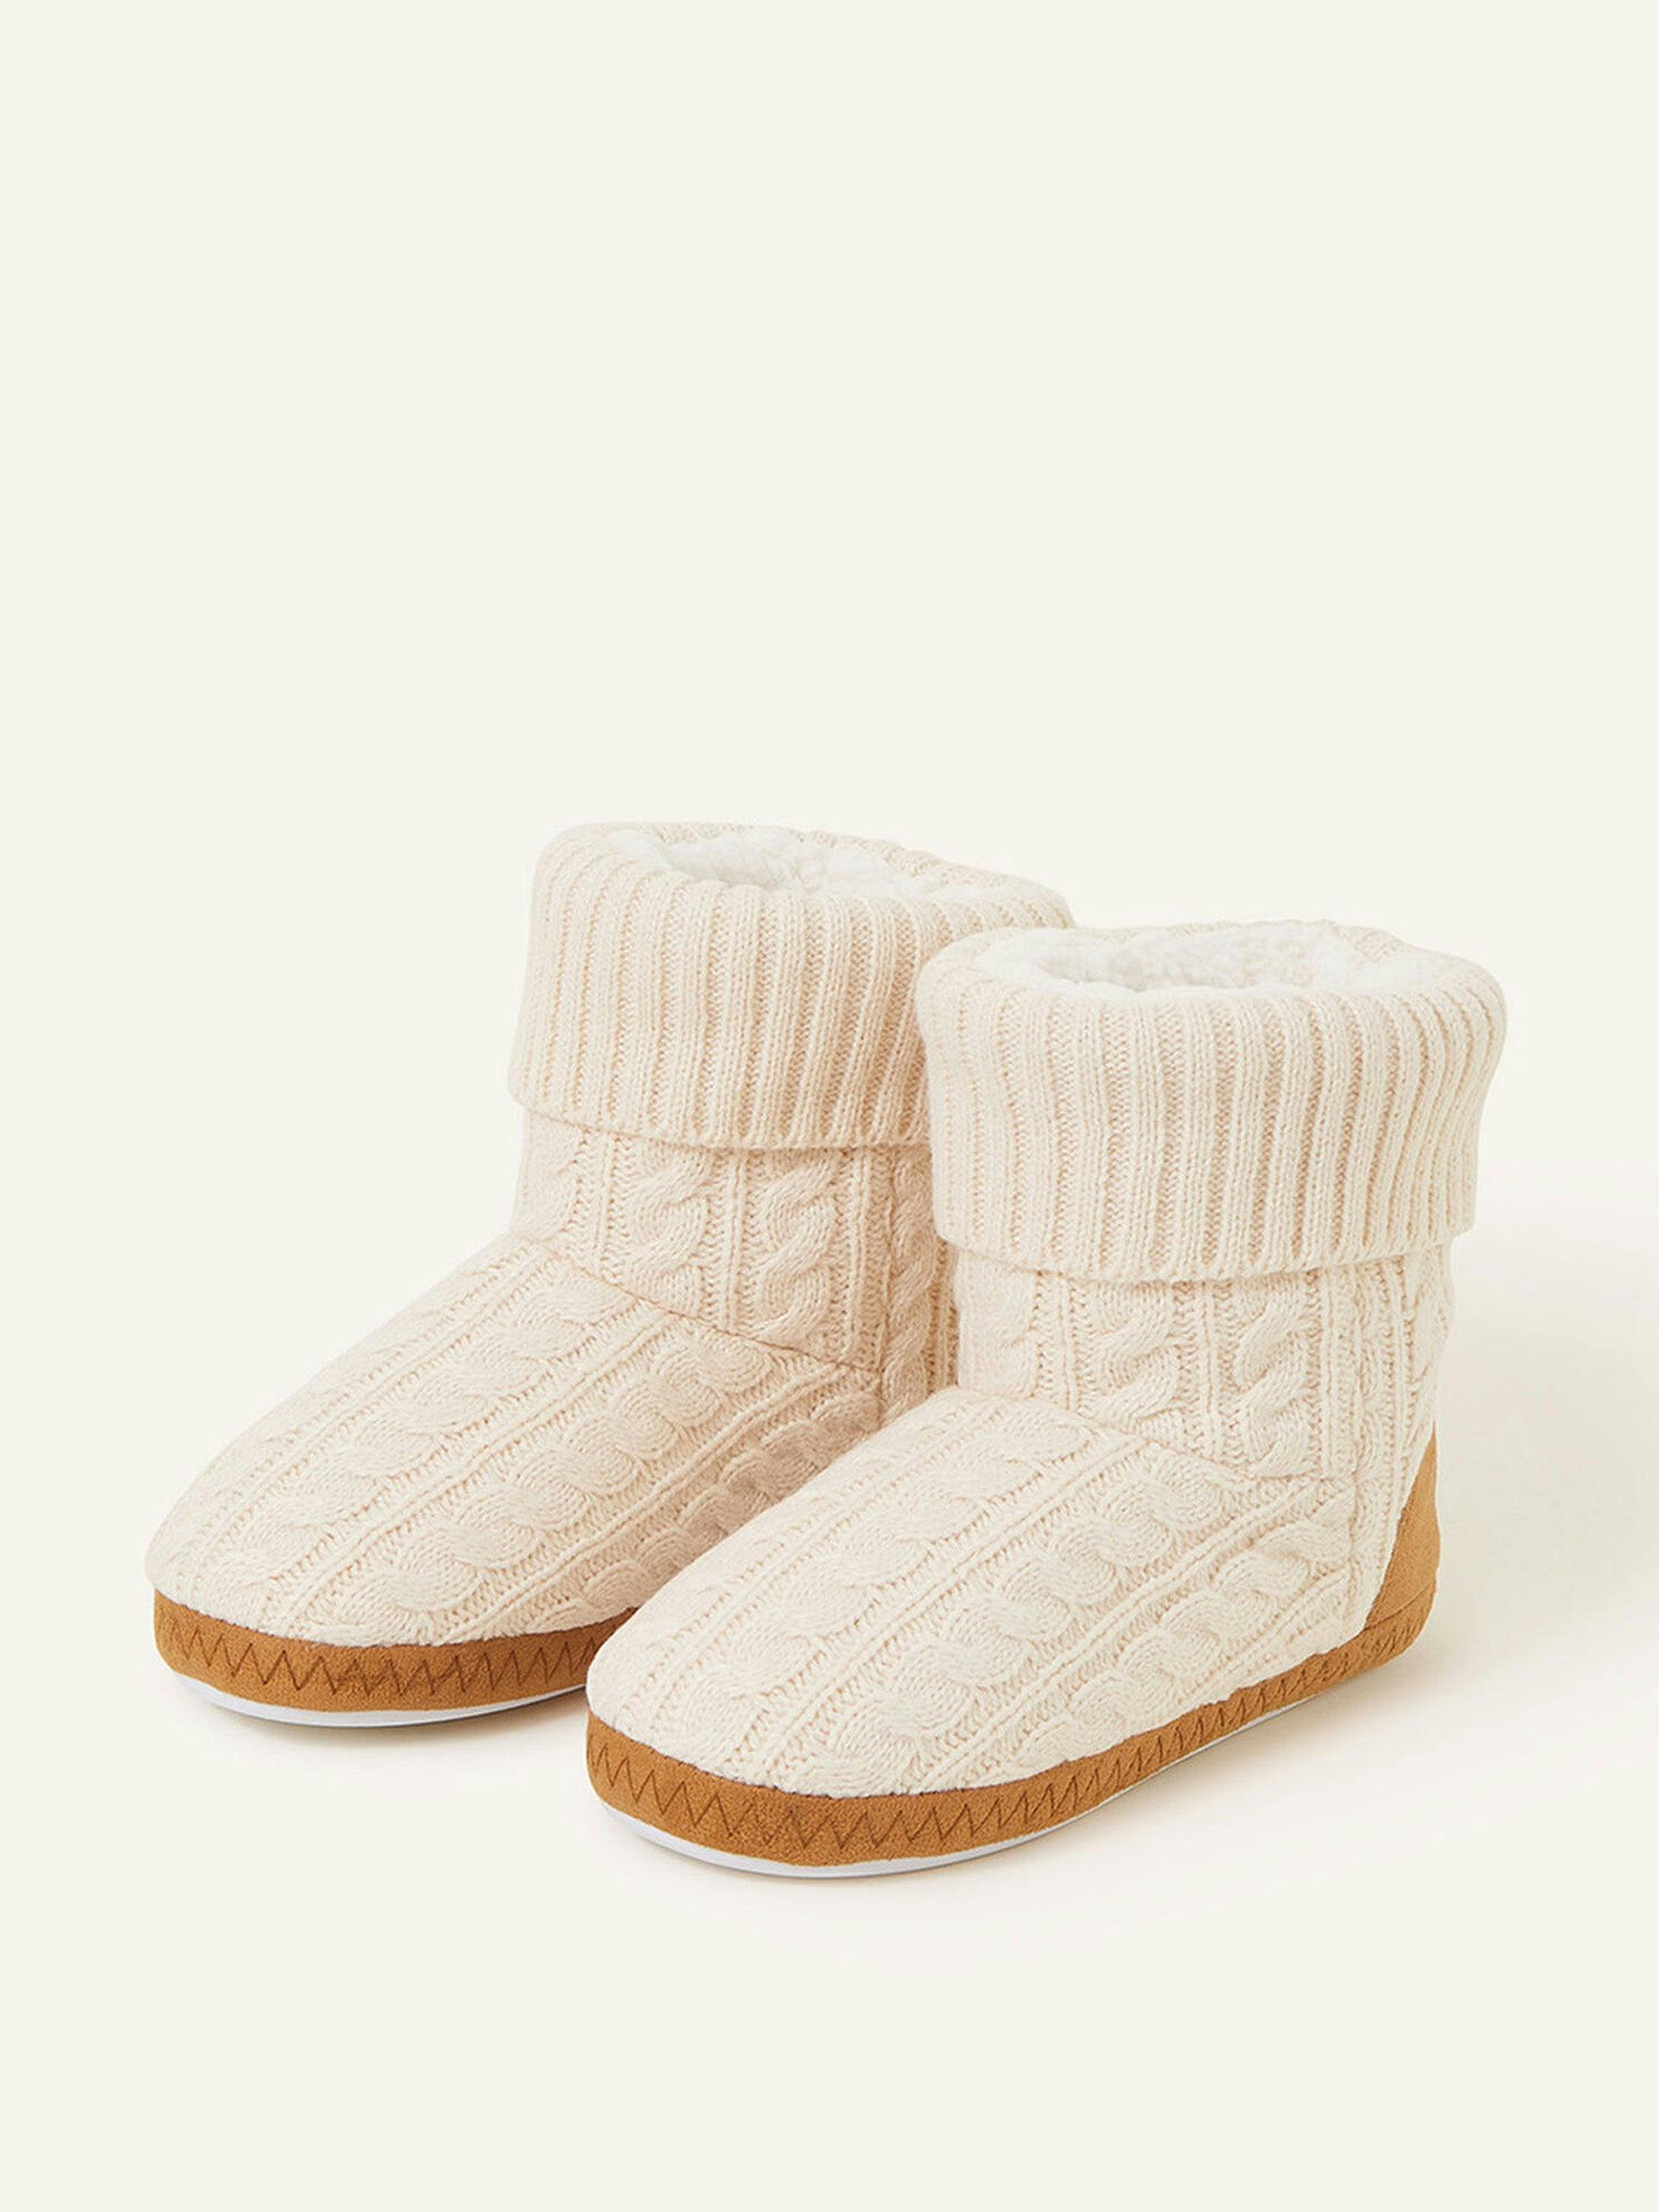 Cable knitted slipper boots